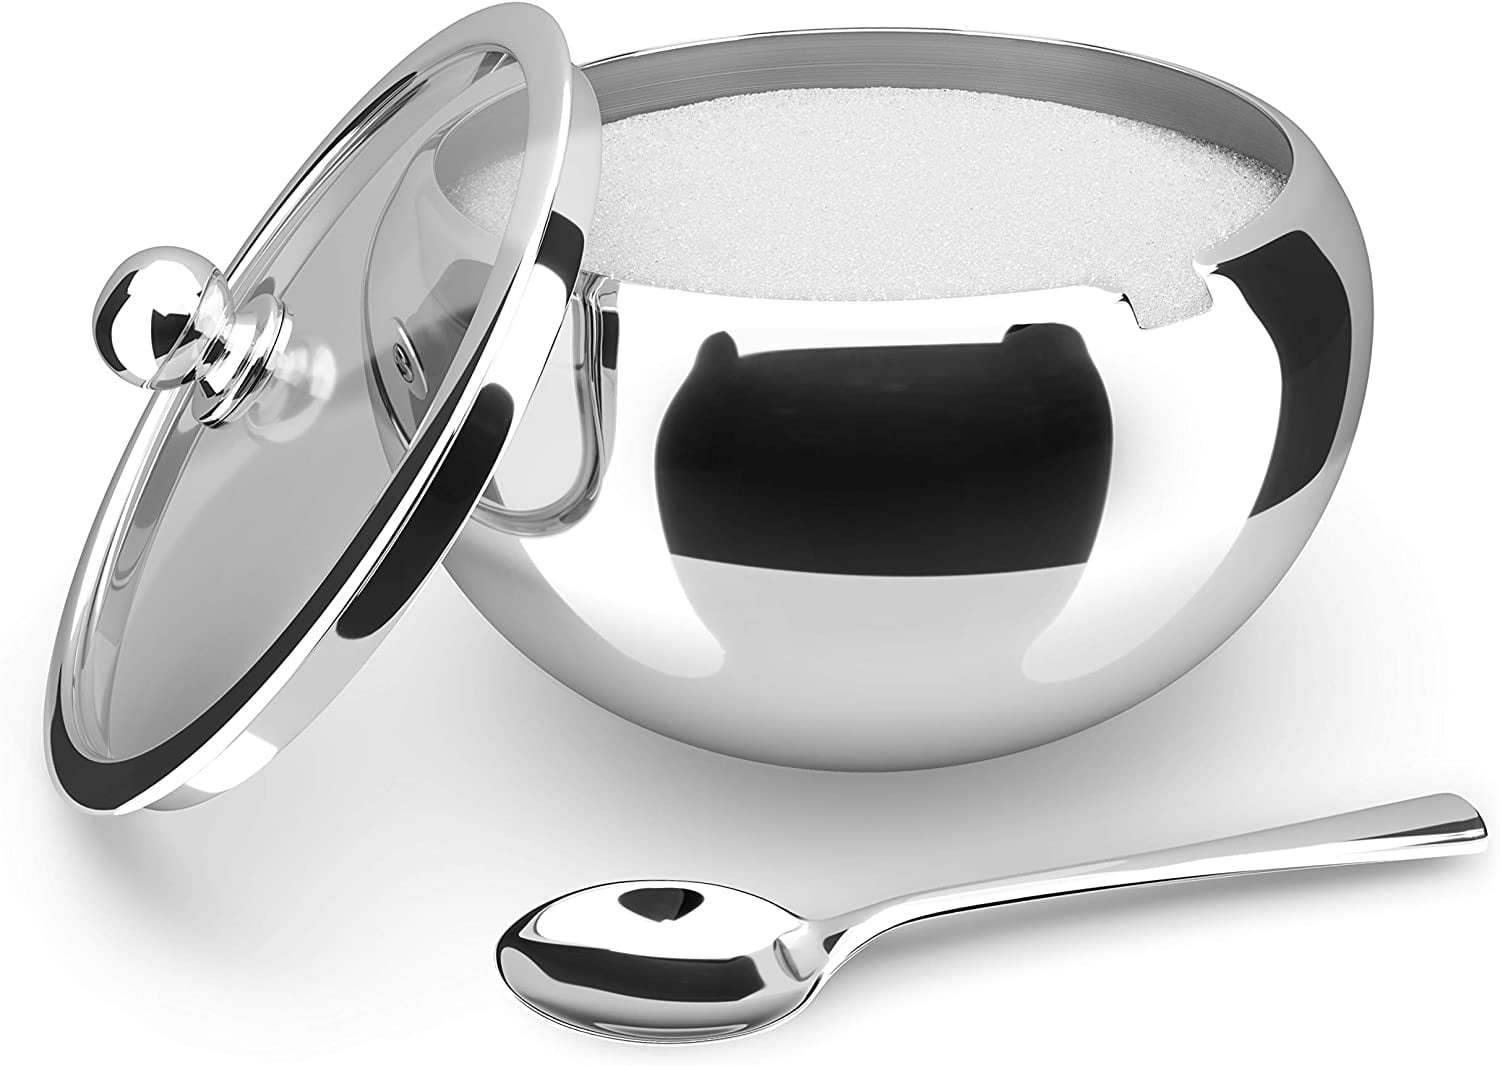 Small Stainless Steel Sugar Bowl with Lid and Spoon in Apple Shape for Kitchen Type A 